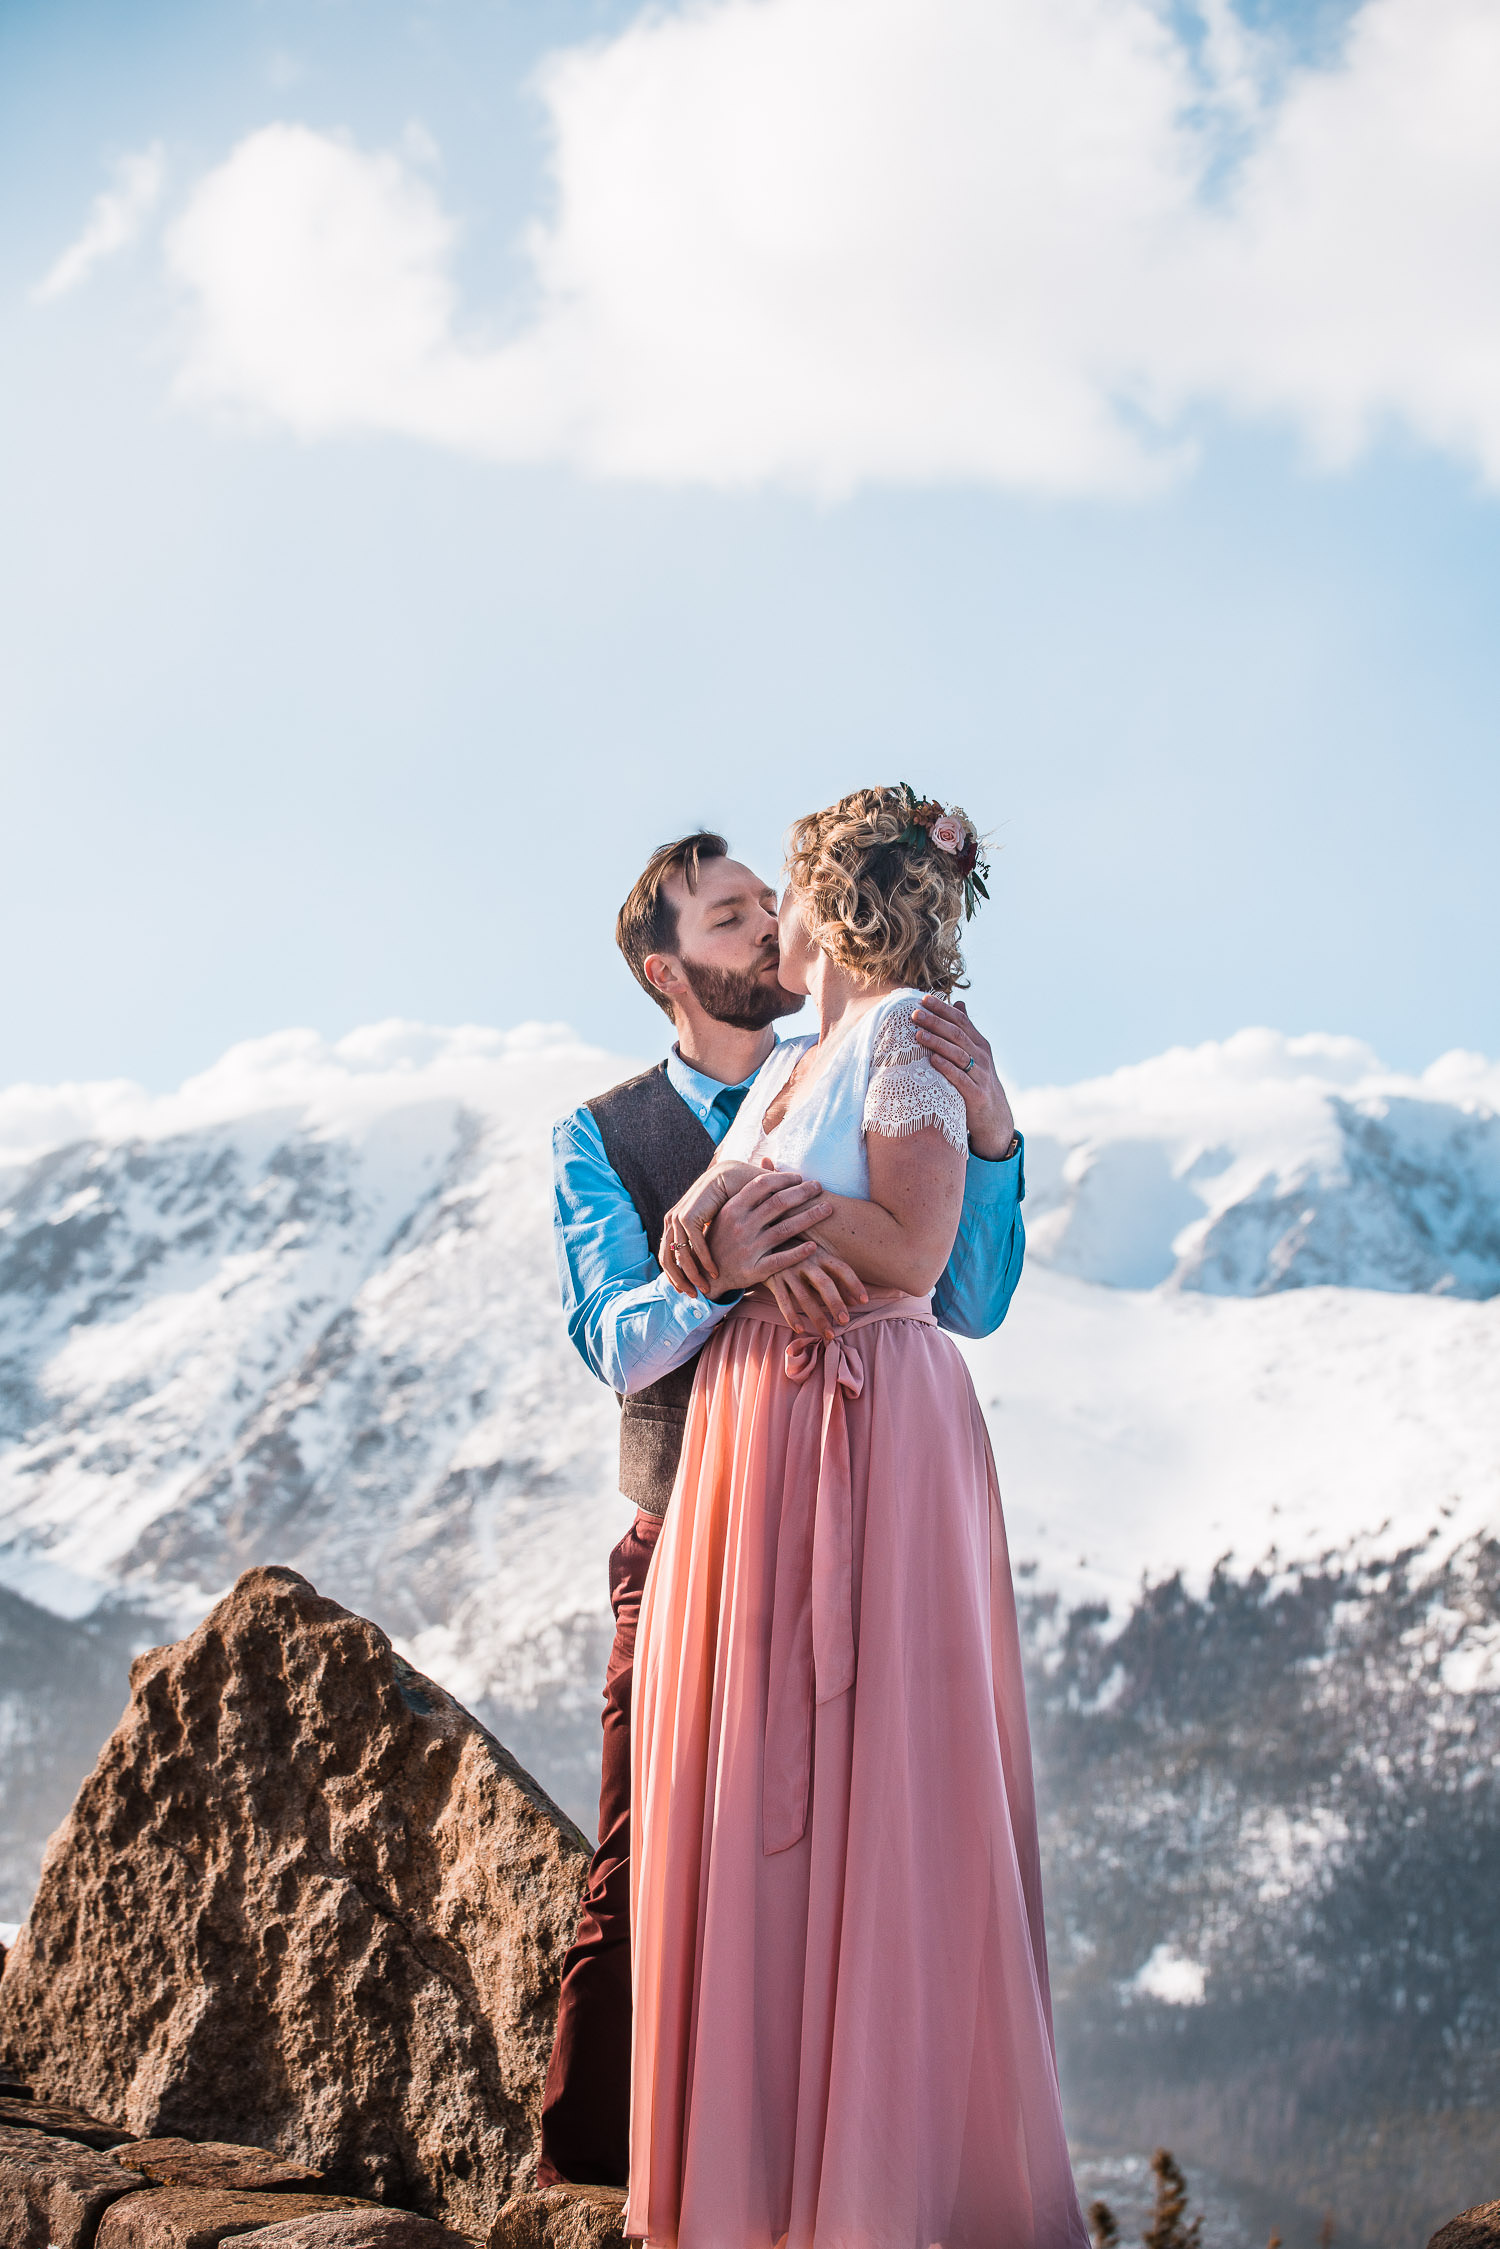 newlyweds embrace in the mountains during their Colorado winter elopement